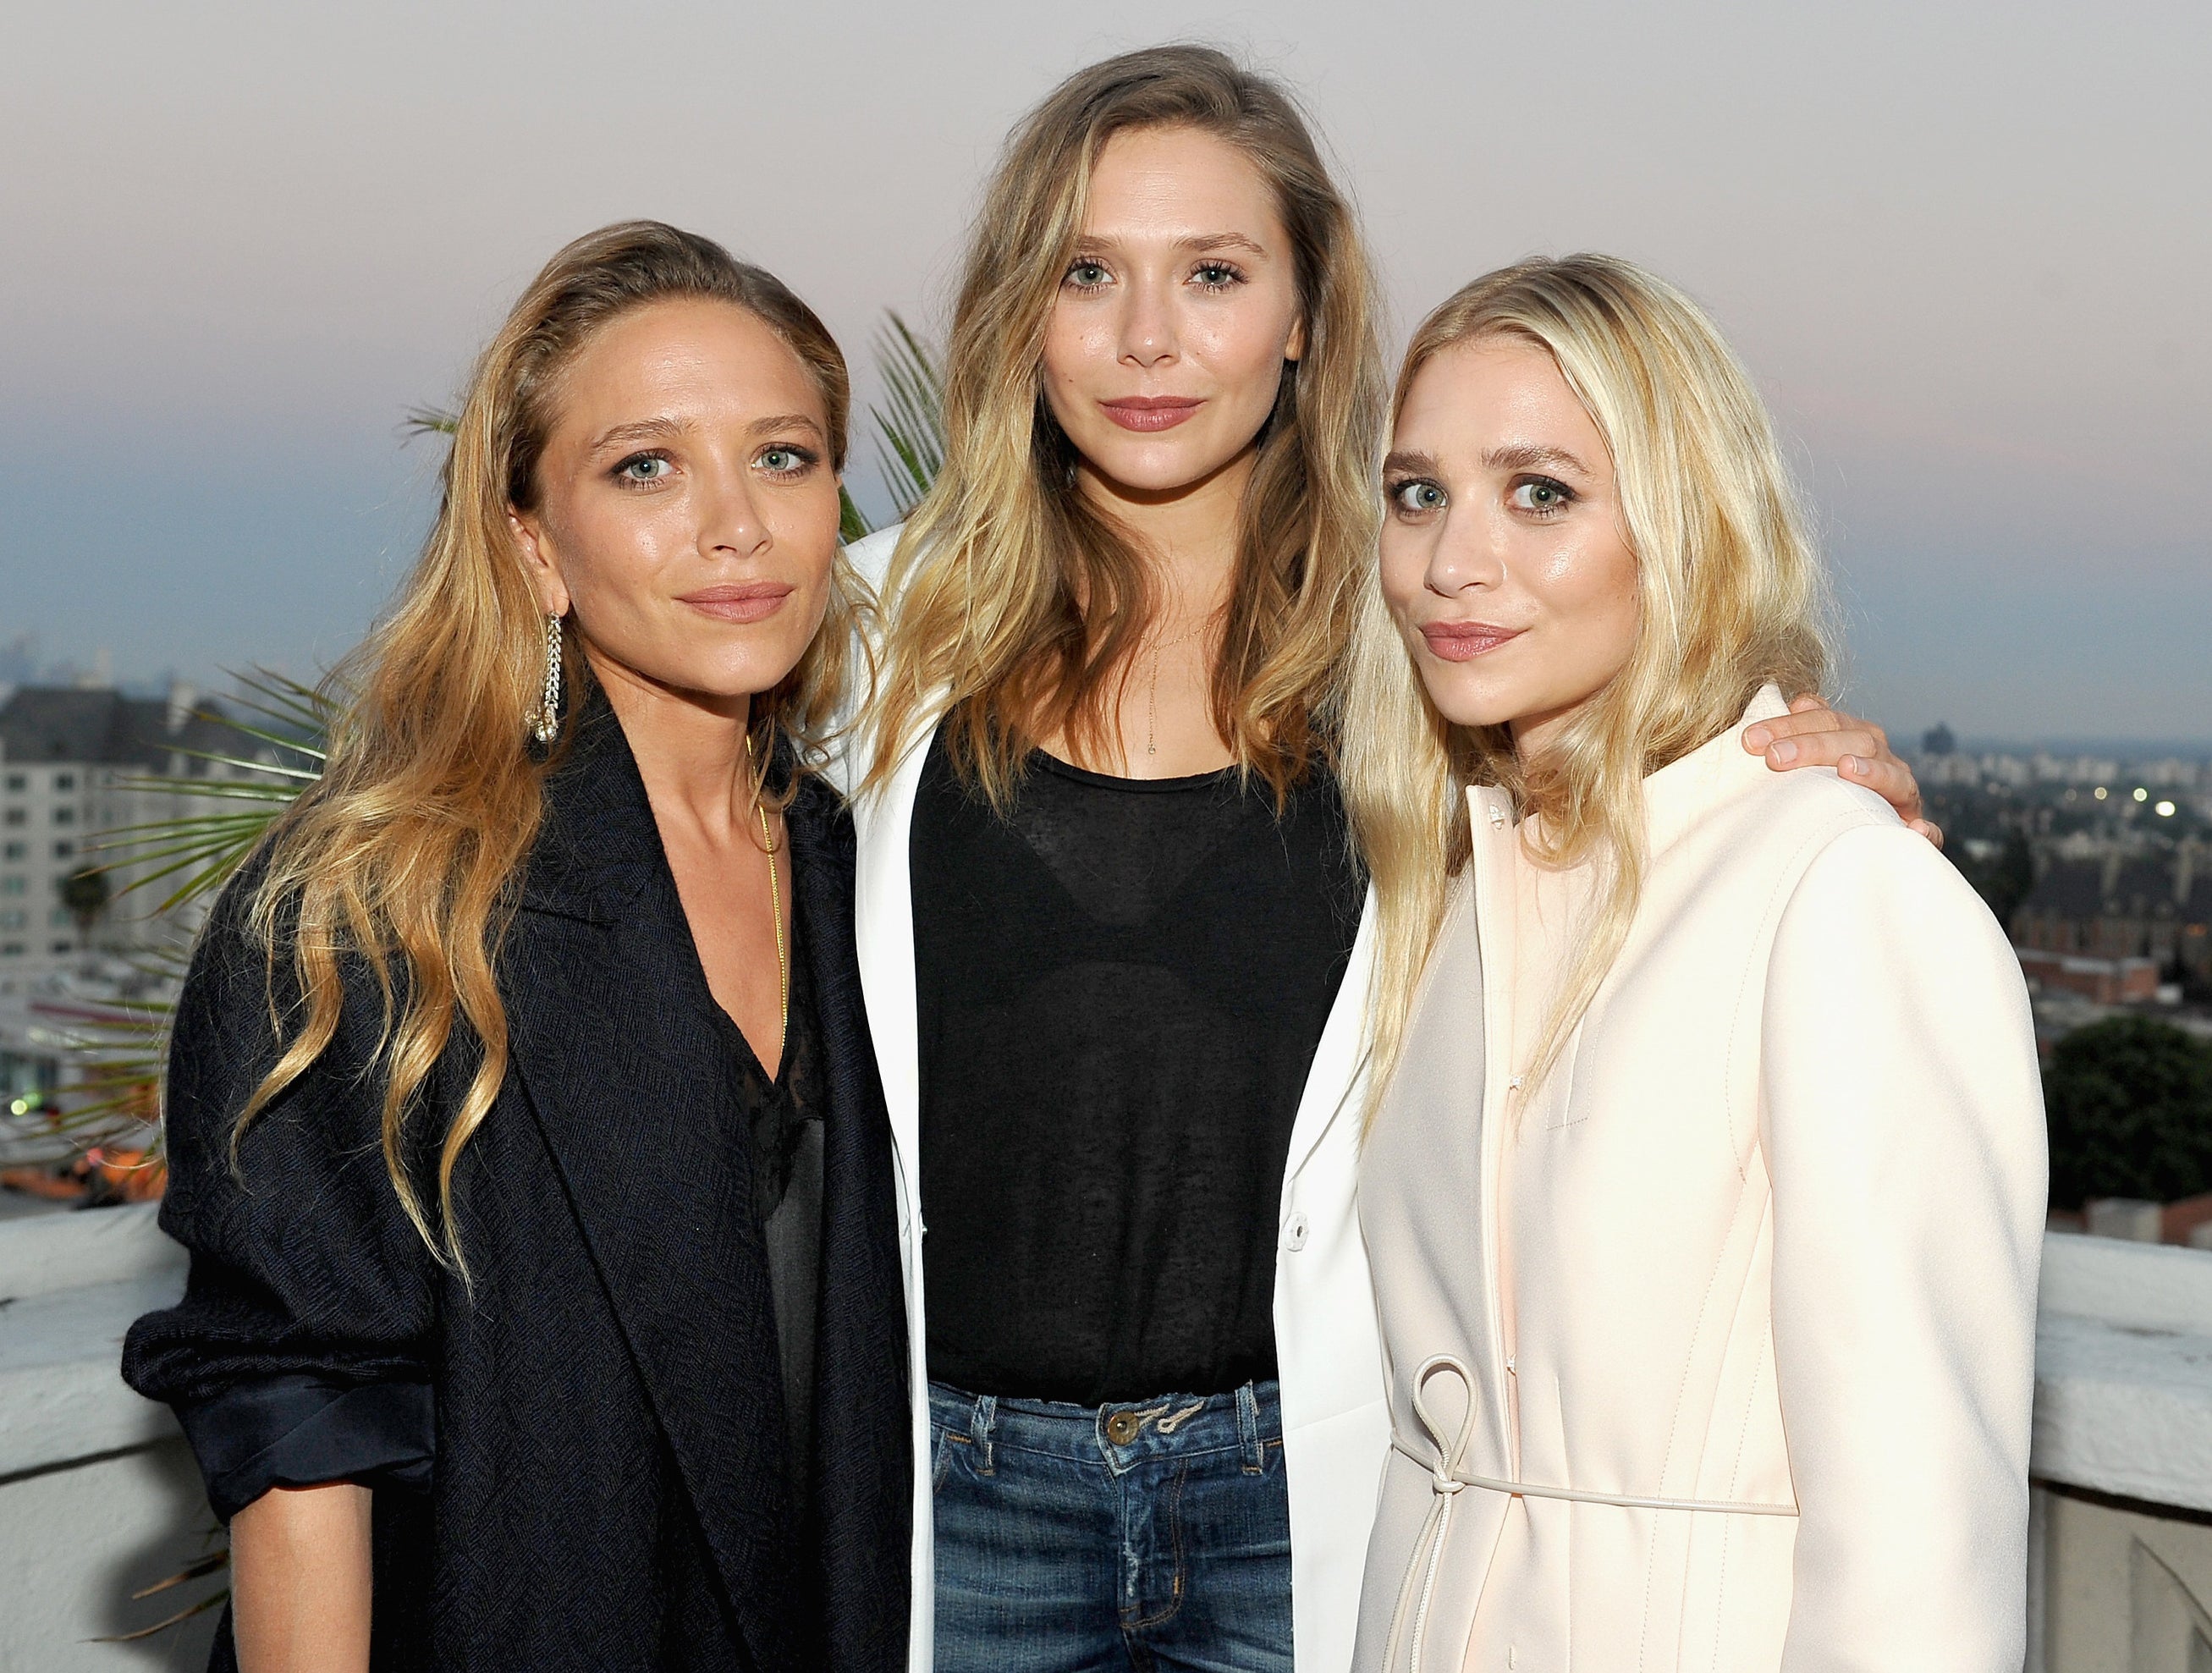 Elizabeth poses with her sisters Mary Kate and Ashley recently